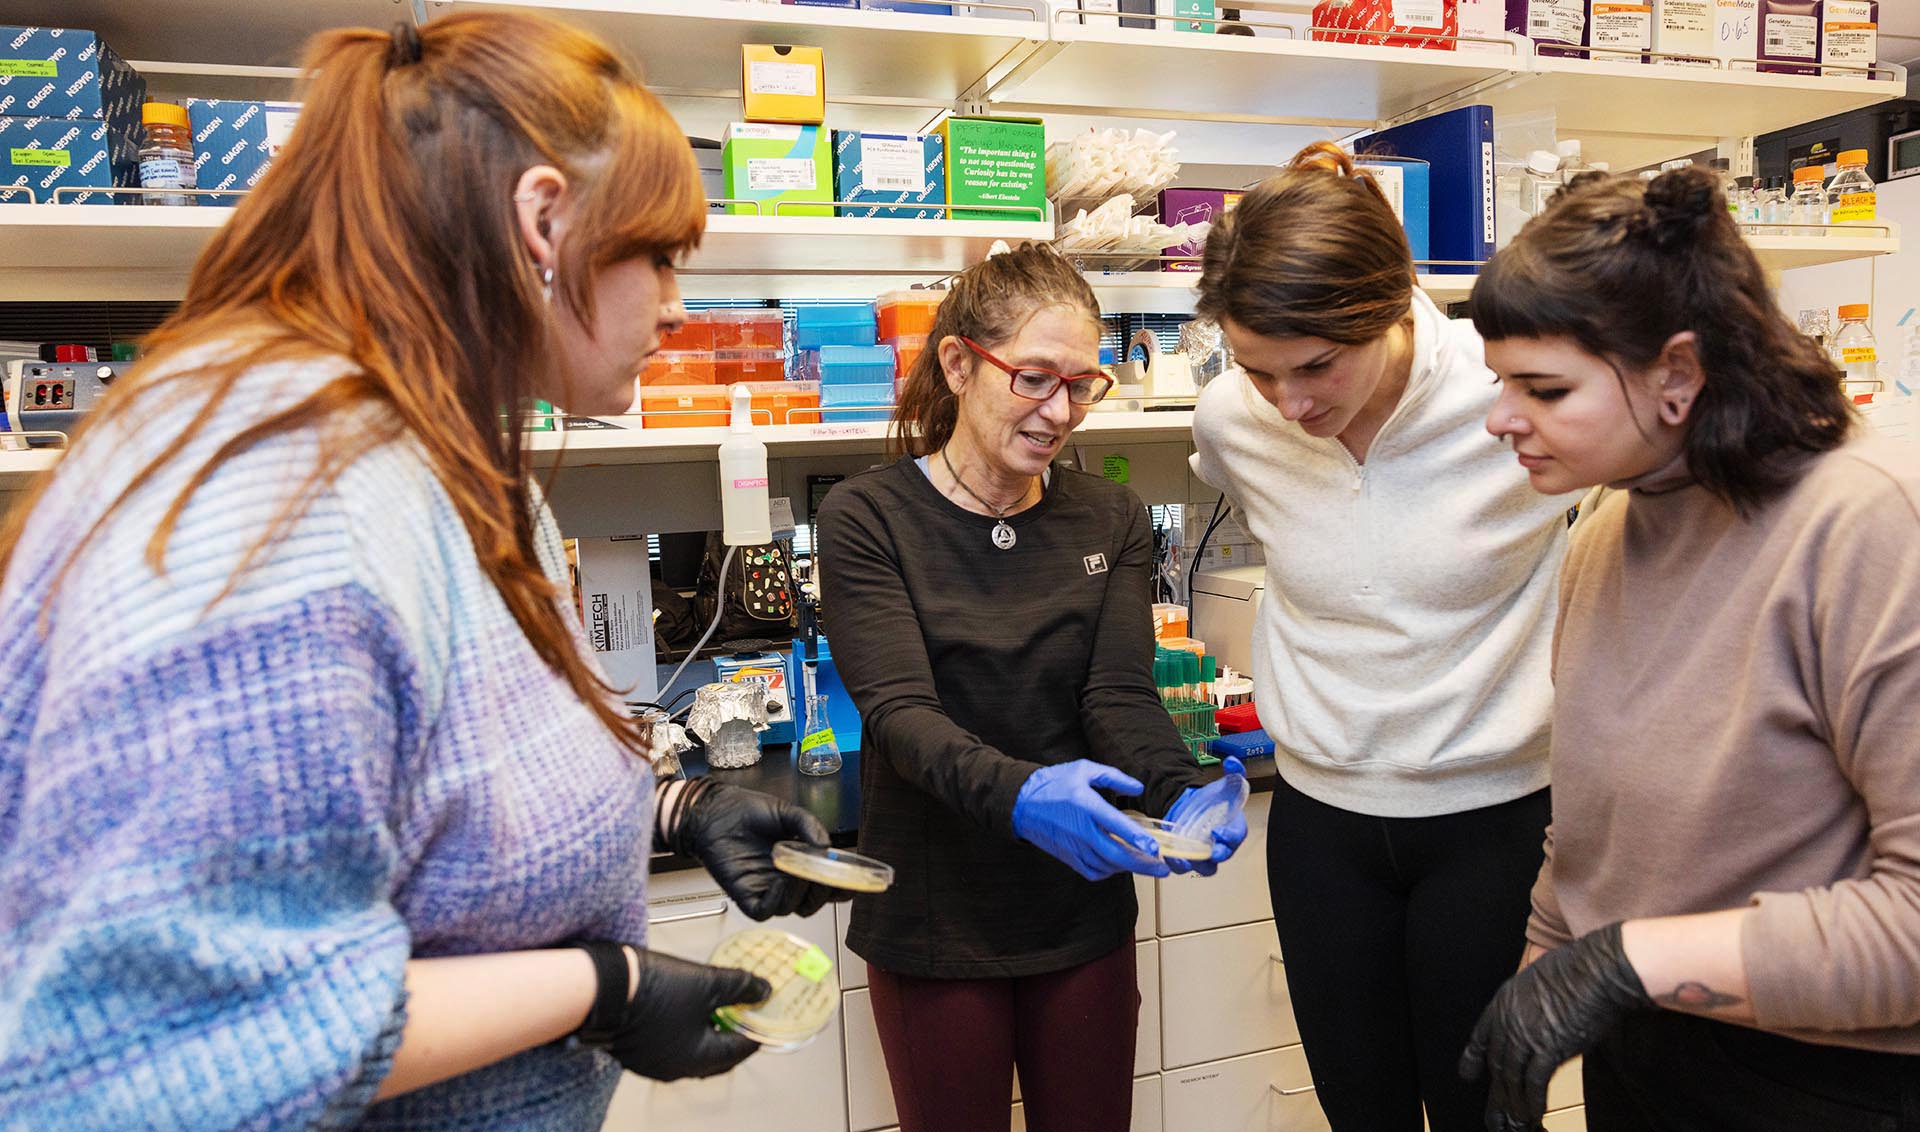 From left to right Brianna Winkler, Dr. Maria Cattel, Brooke Paslay and Meg Green talk in the lab.